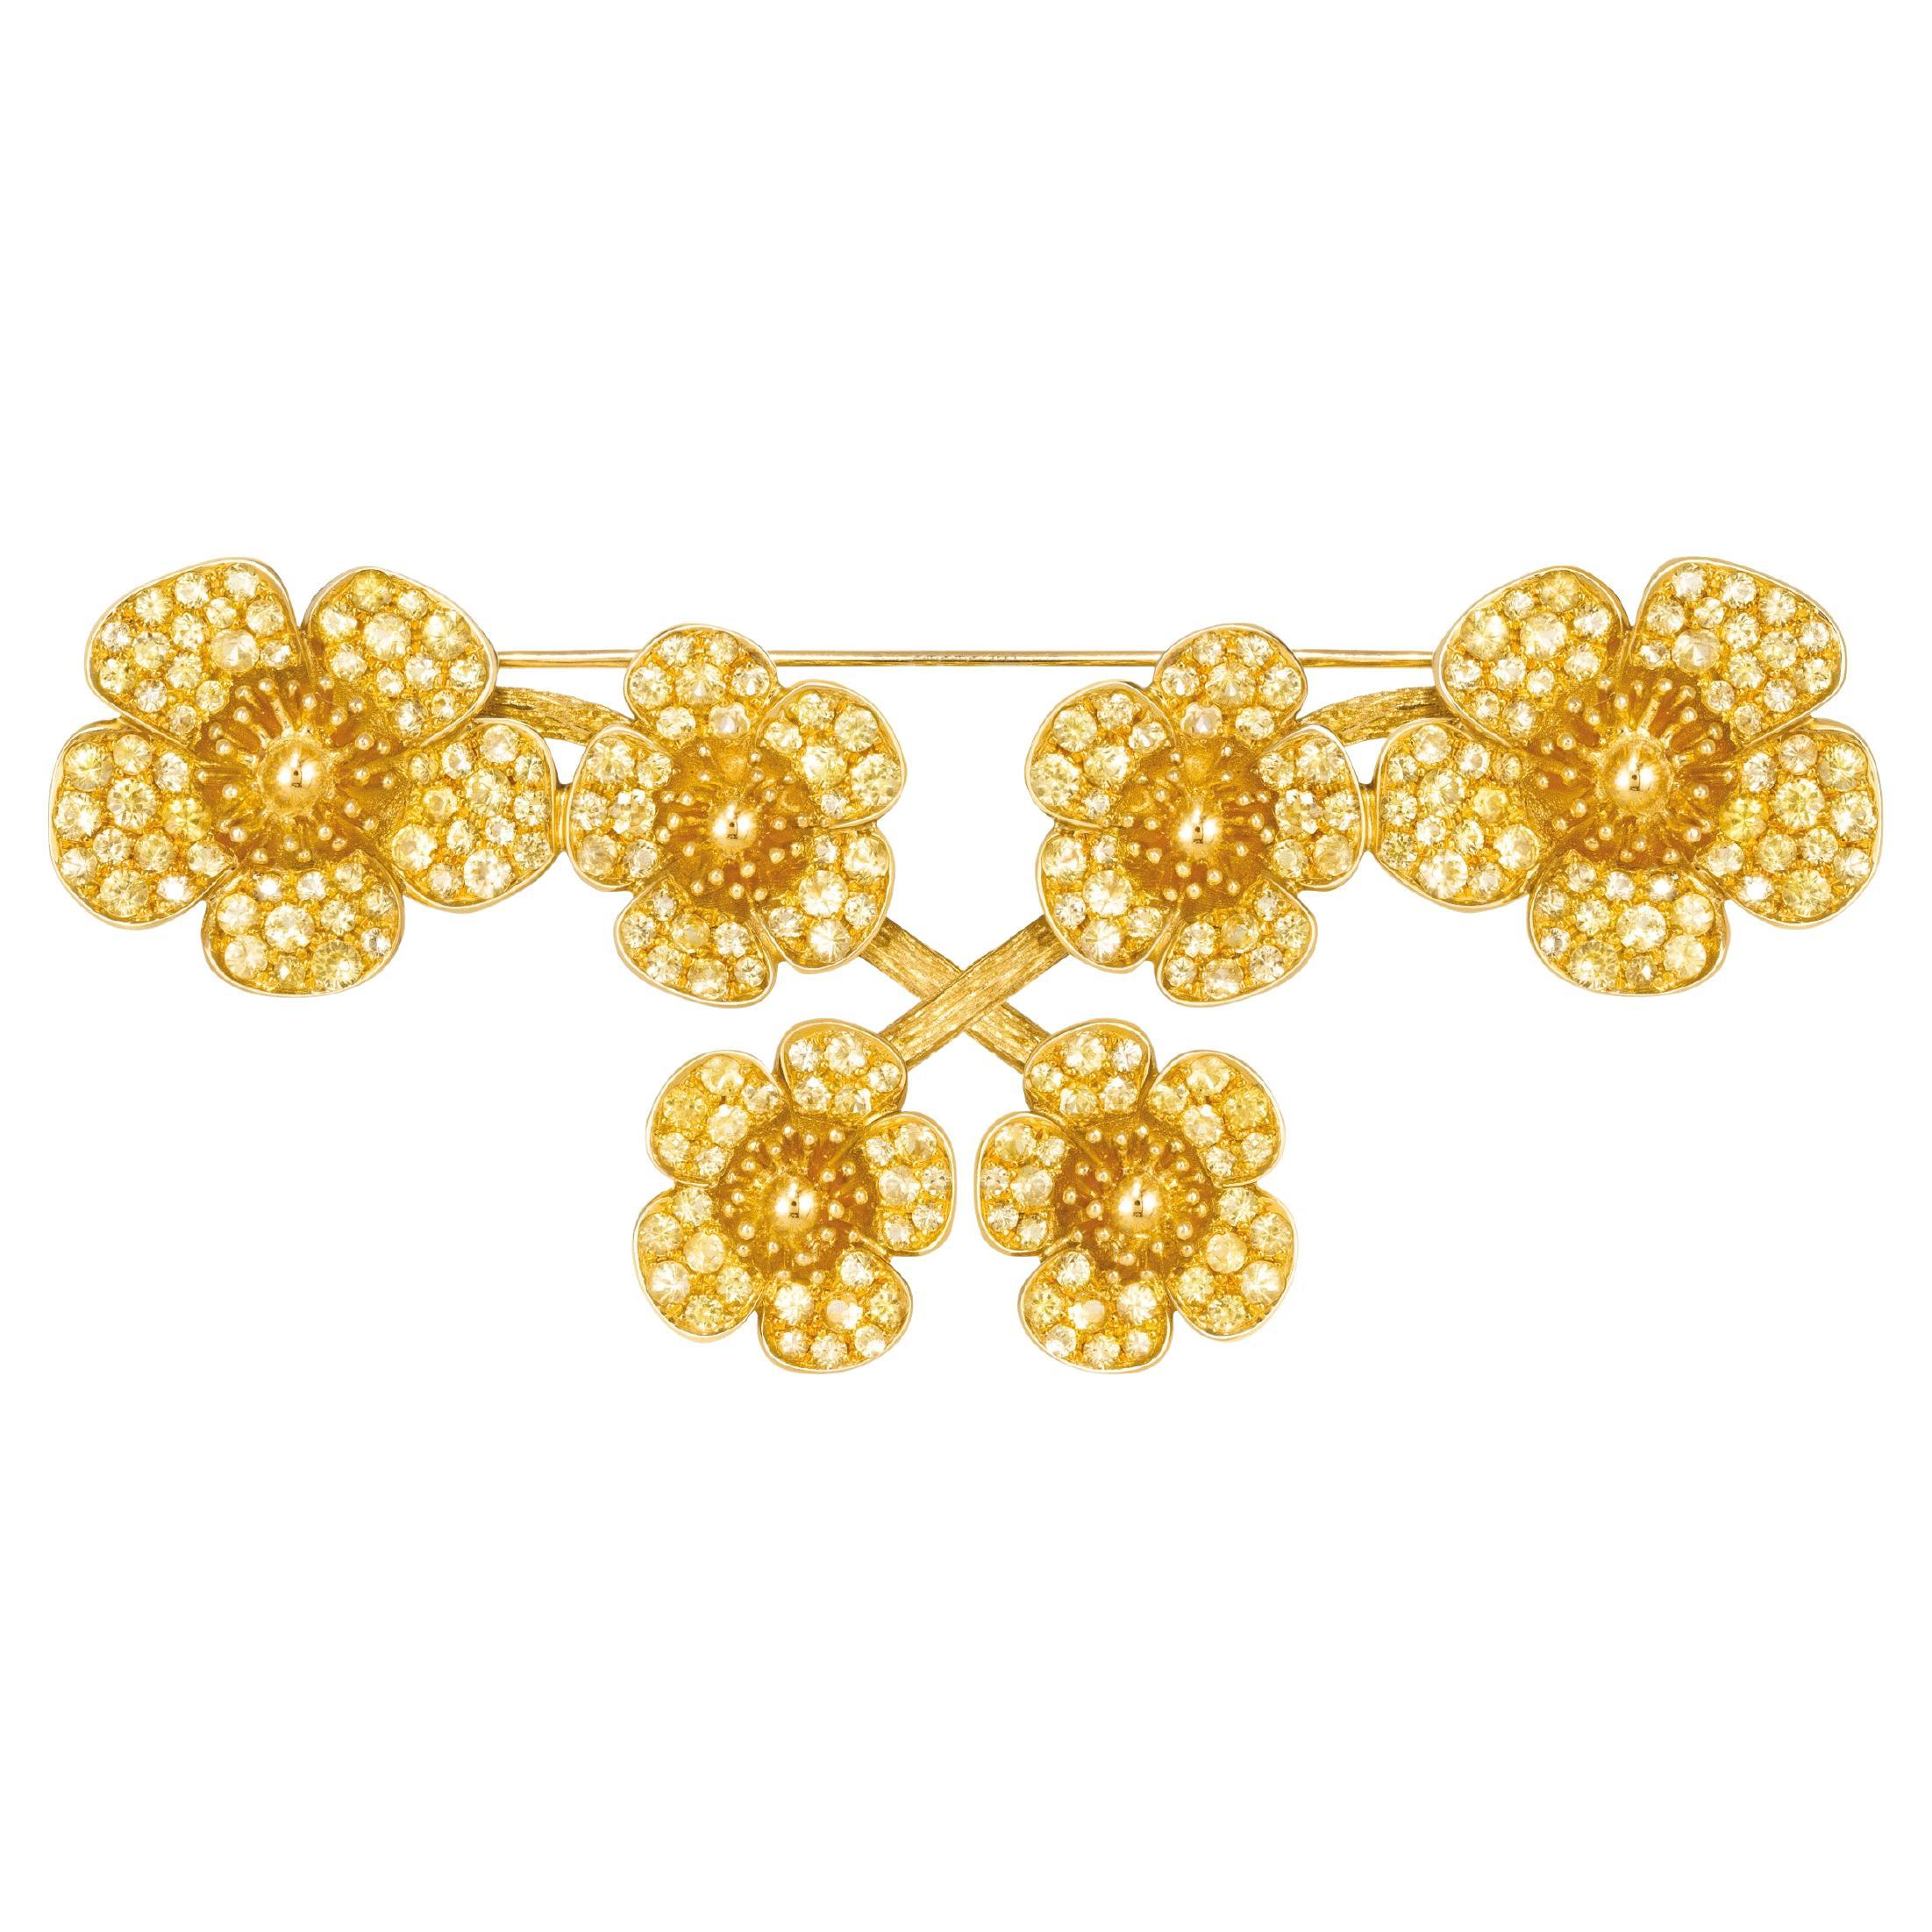 Transformable Brooch with Buttercup Flowers - 18k Gold, Yellow Sapphires For Sale